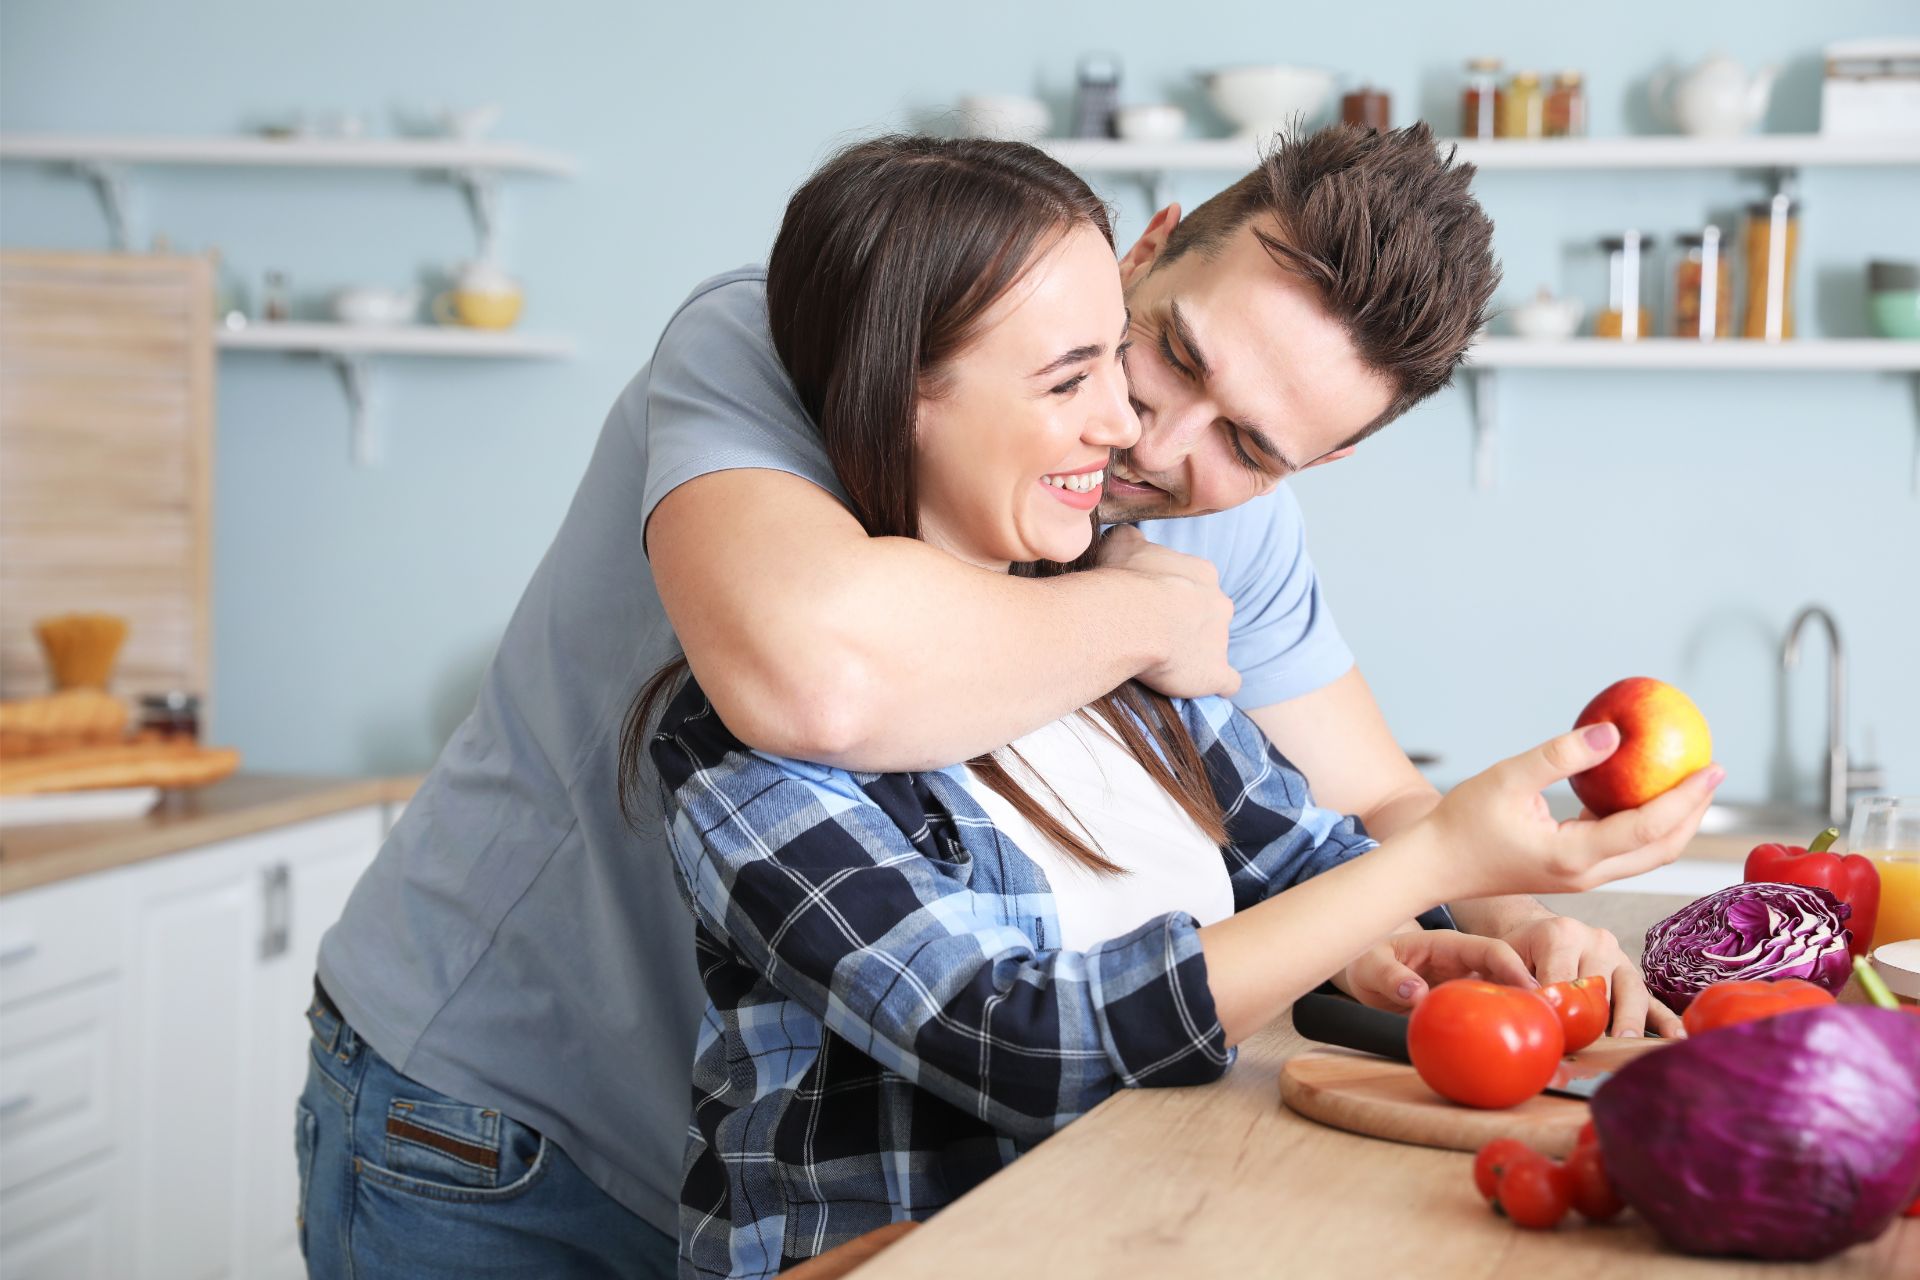 romantic things to do for your husband at home